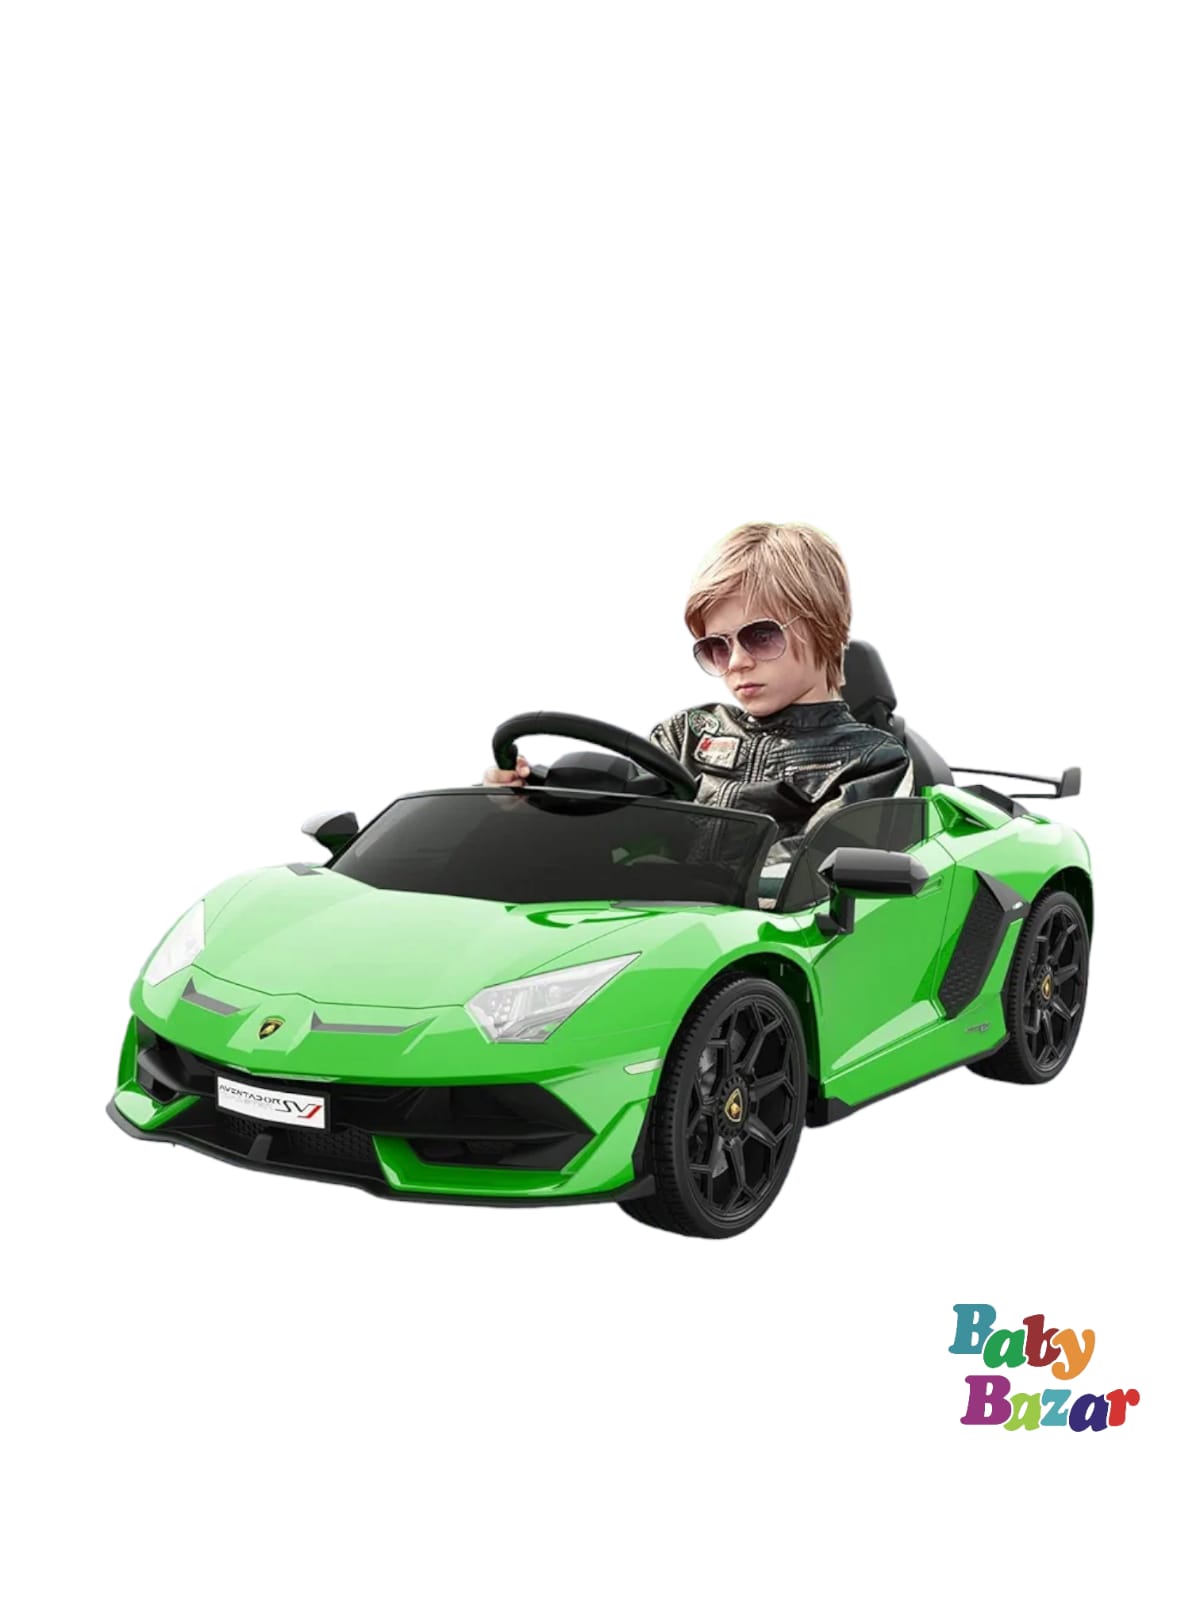 Ride on Car for Kids 12V Licensed Lamborghini Electric Vehicles Battery Powered Sports Car with Control, 2 Speeds, Sound System, LED Headlights and Hydraulic Doors (Green)